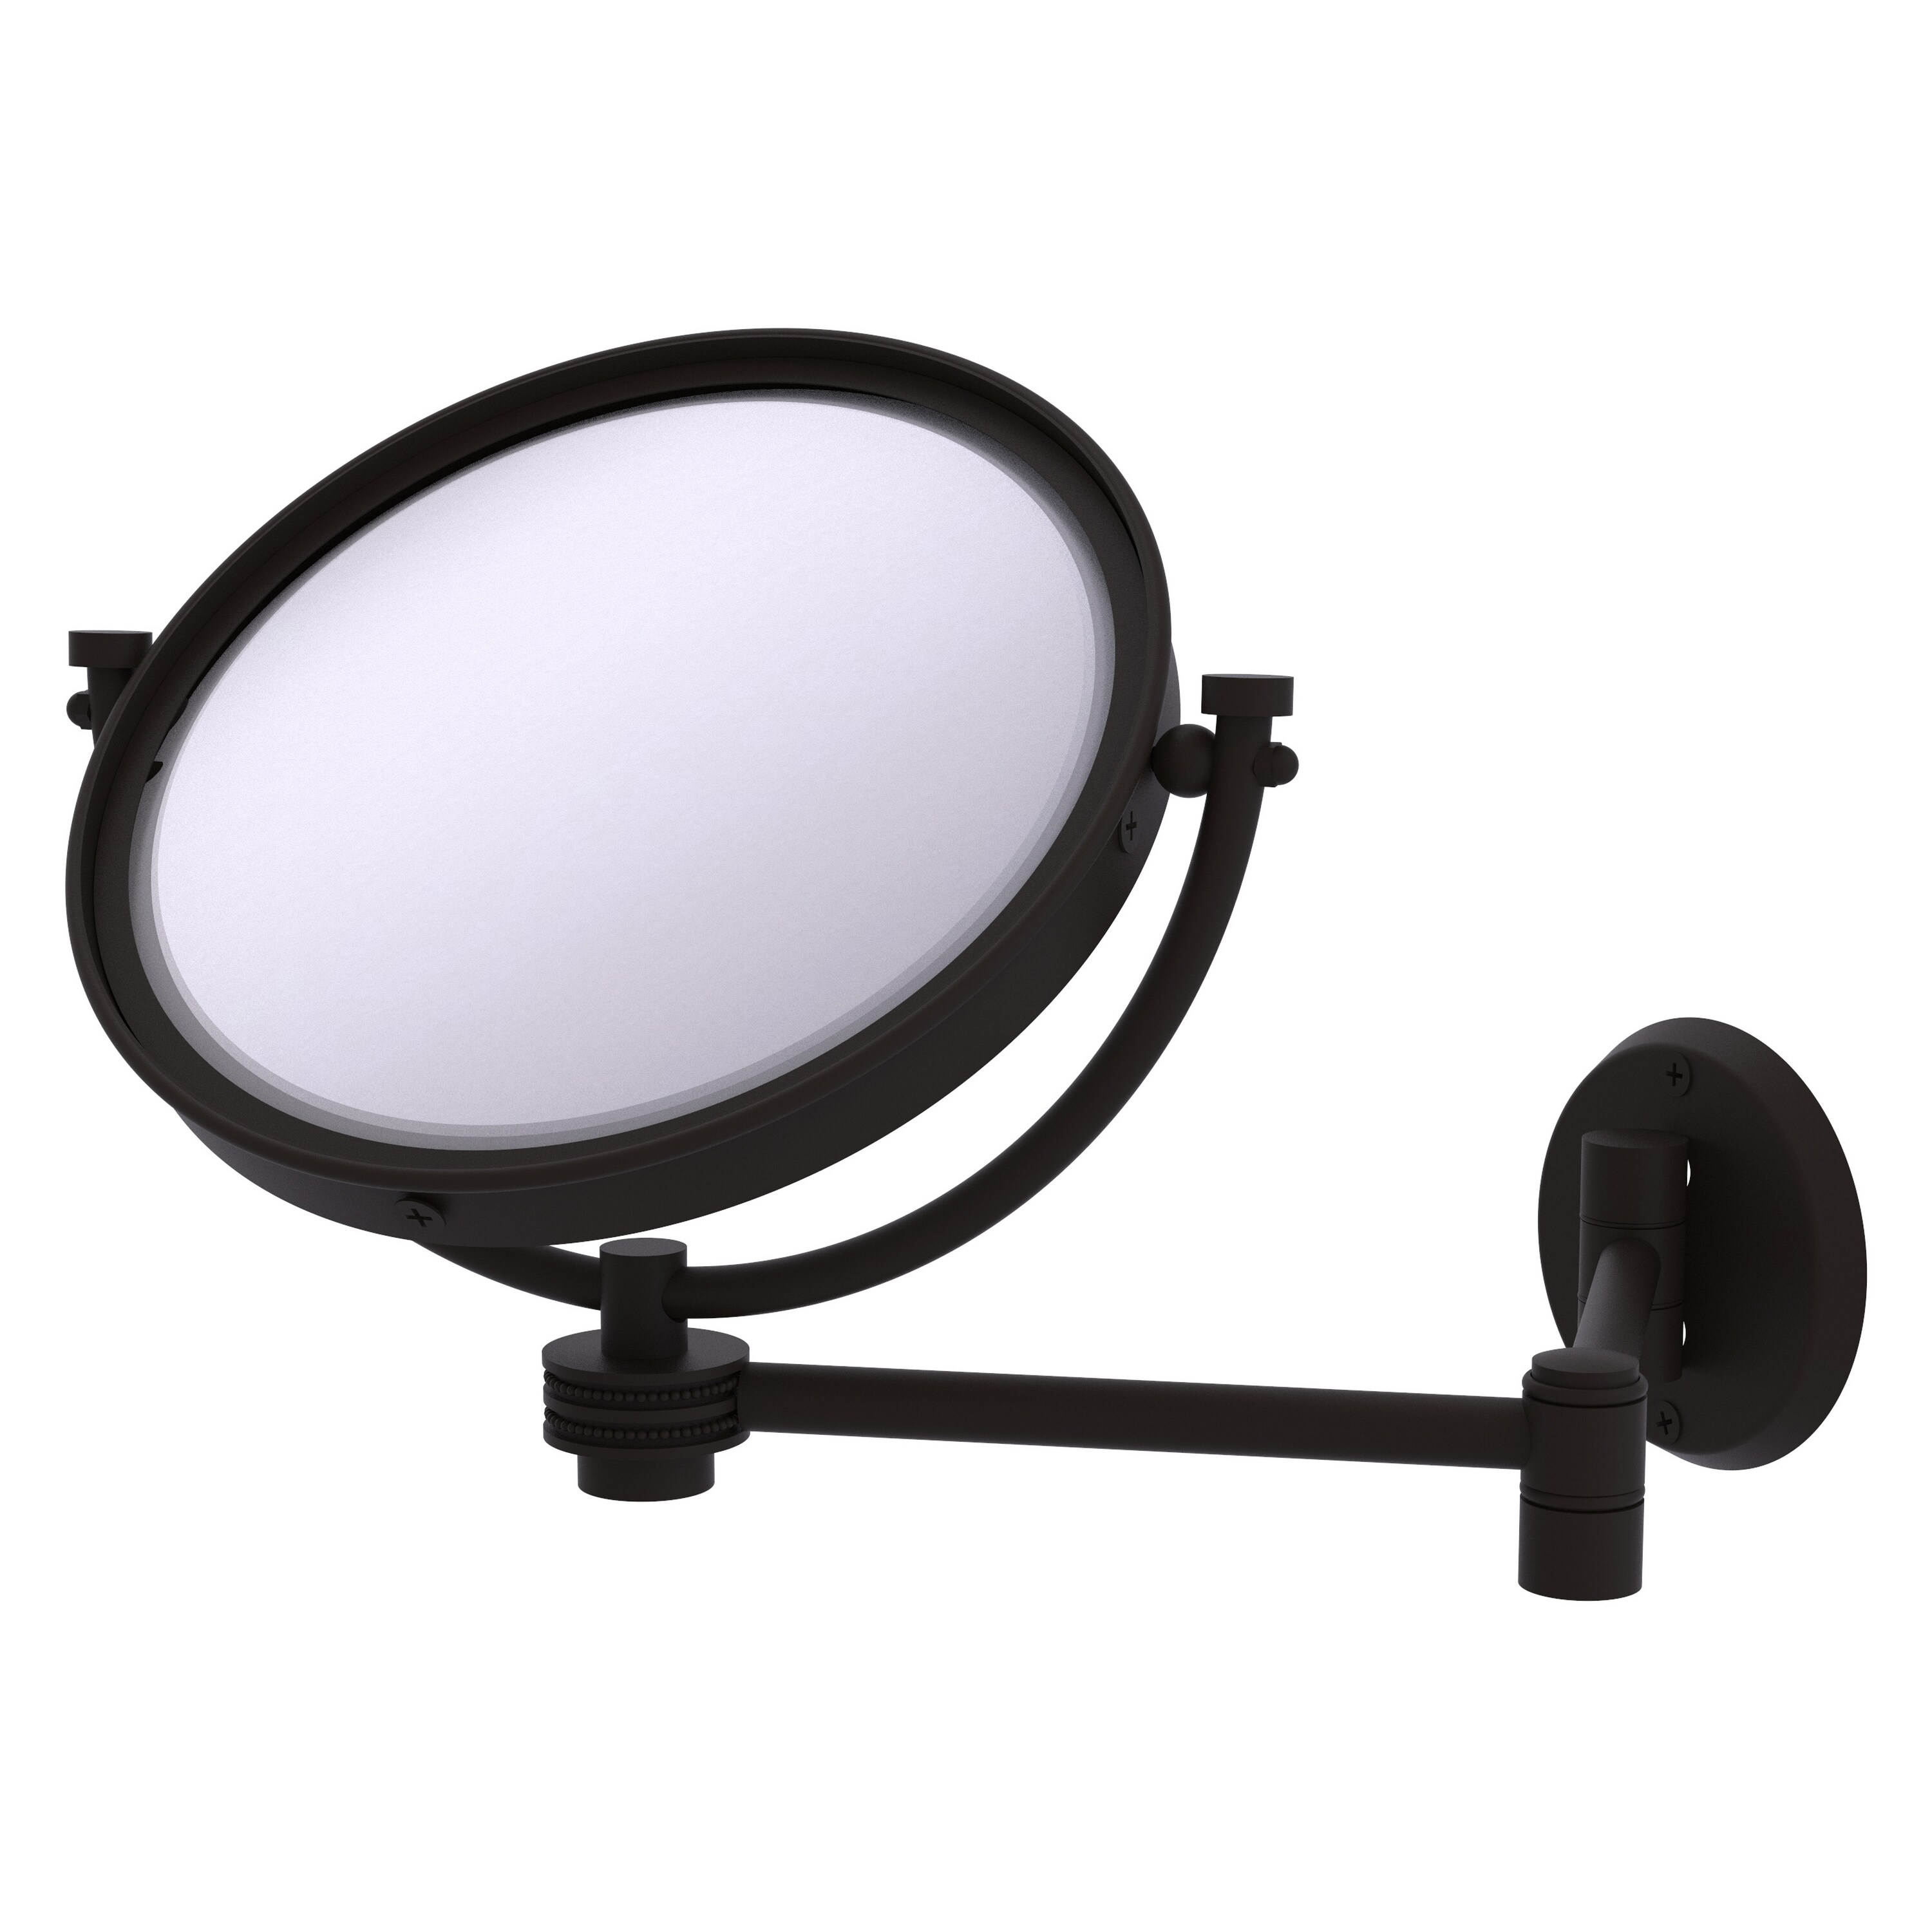 8-in x 10-in Oil-Rubbed Chrome Double-sided 5X Magnifying Wall-mounted Vanity Mirror | - Allied Brass WM-6D/4X-ORB